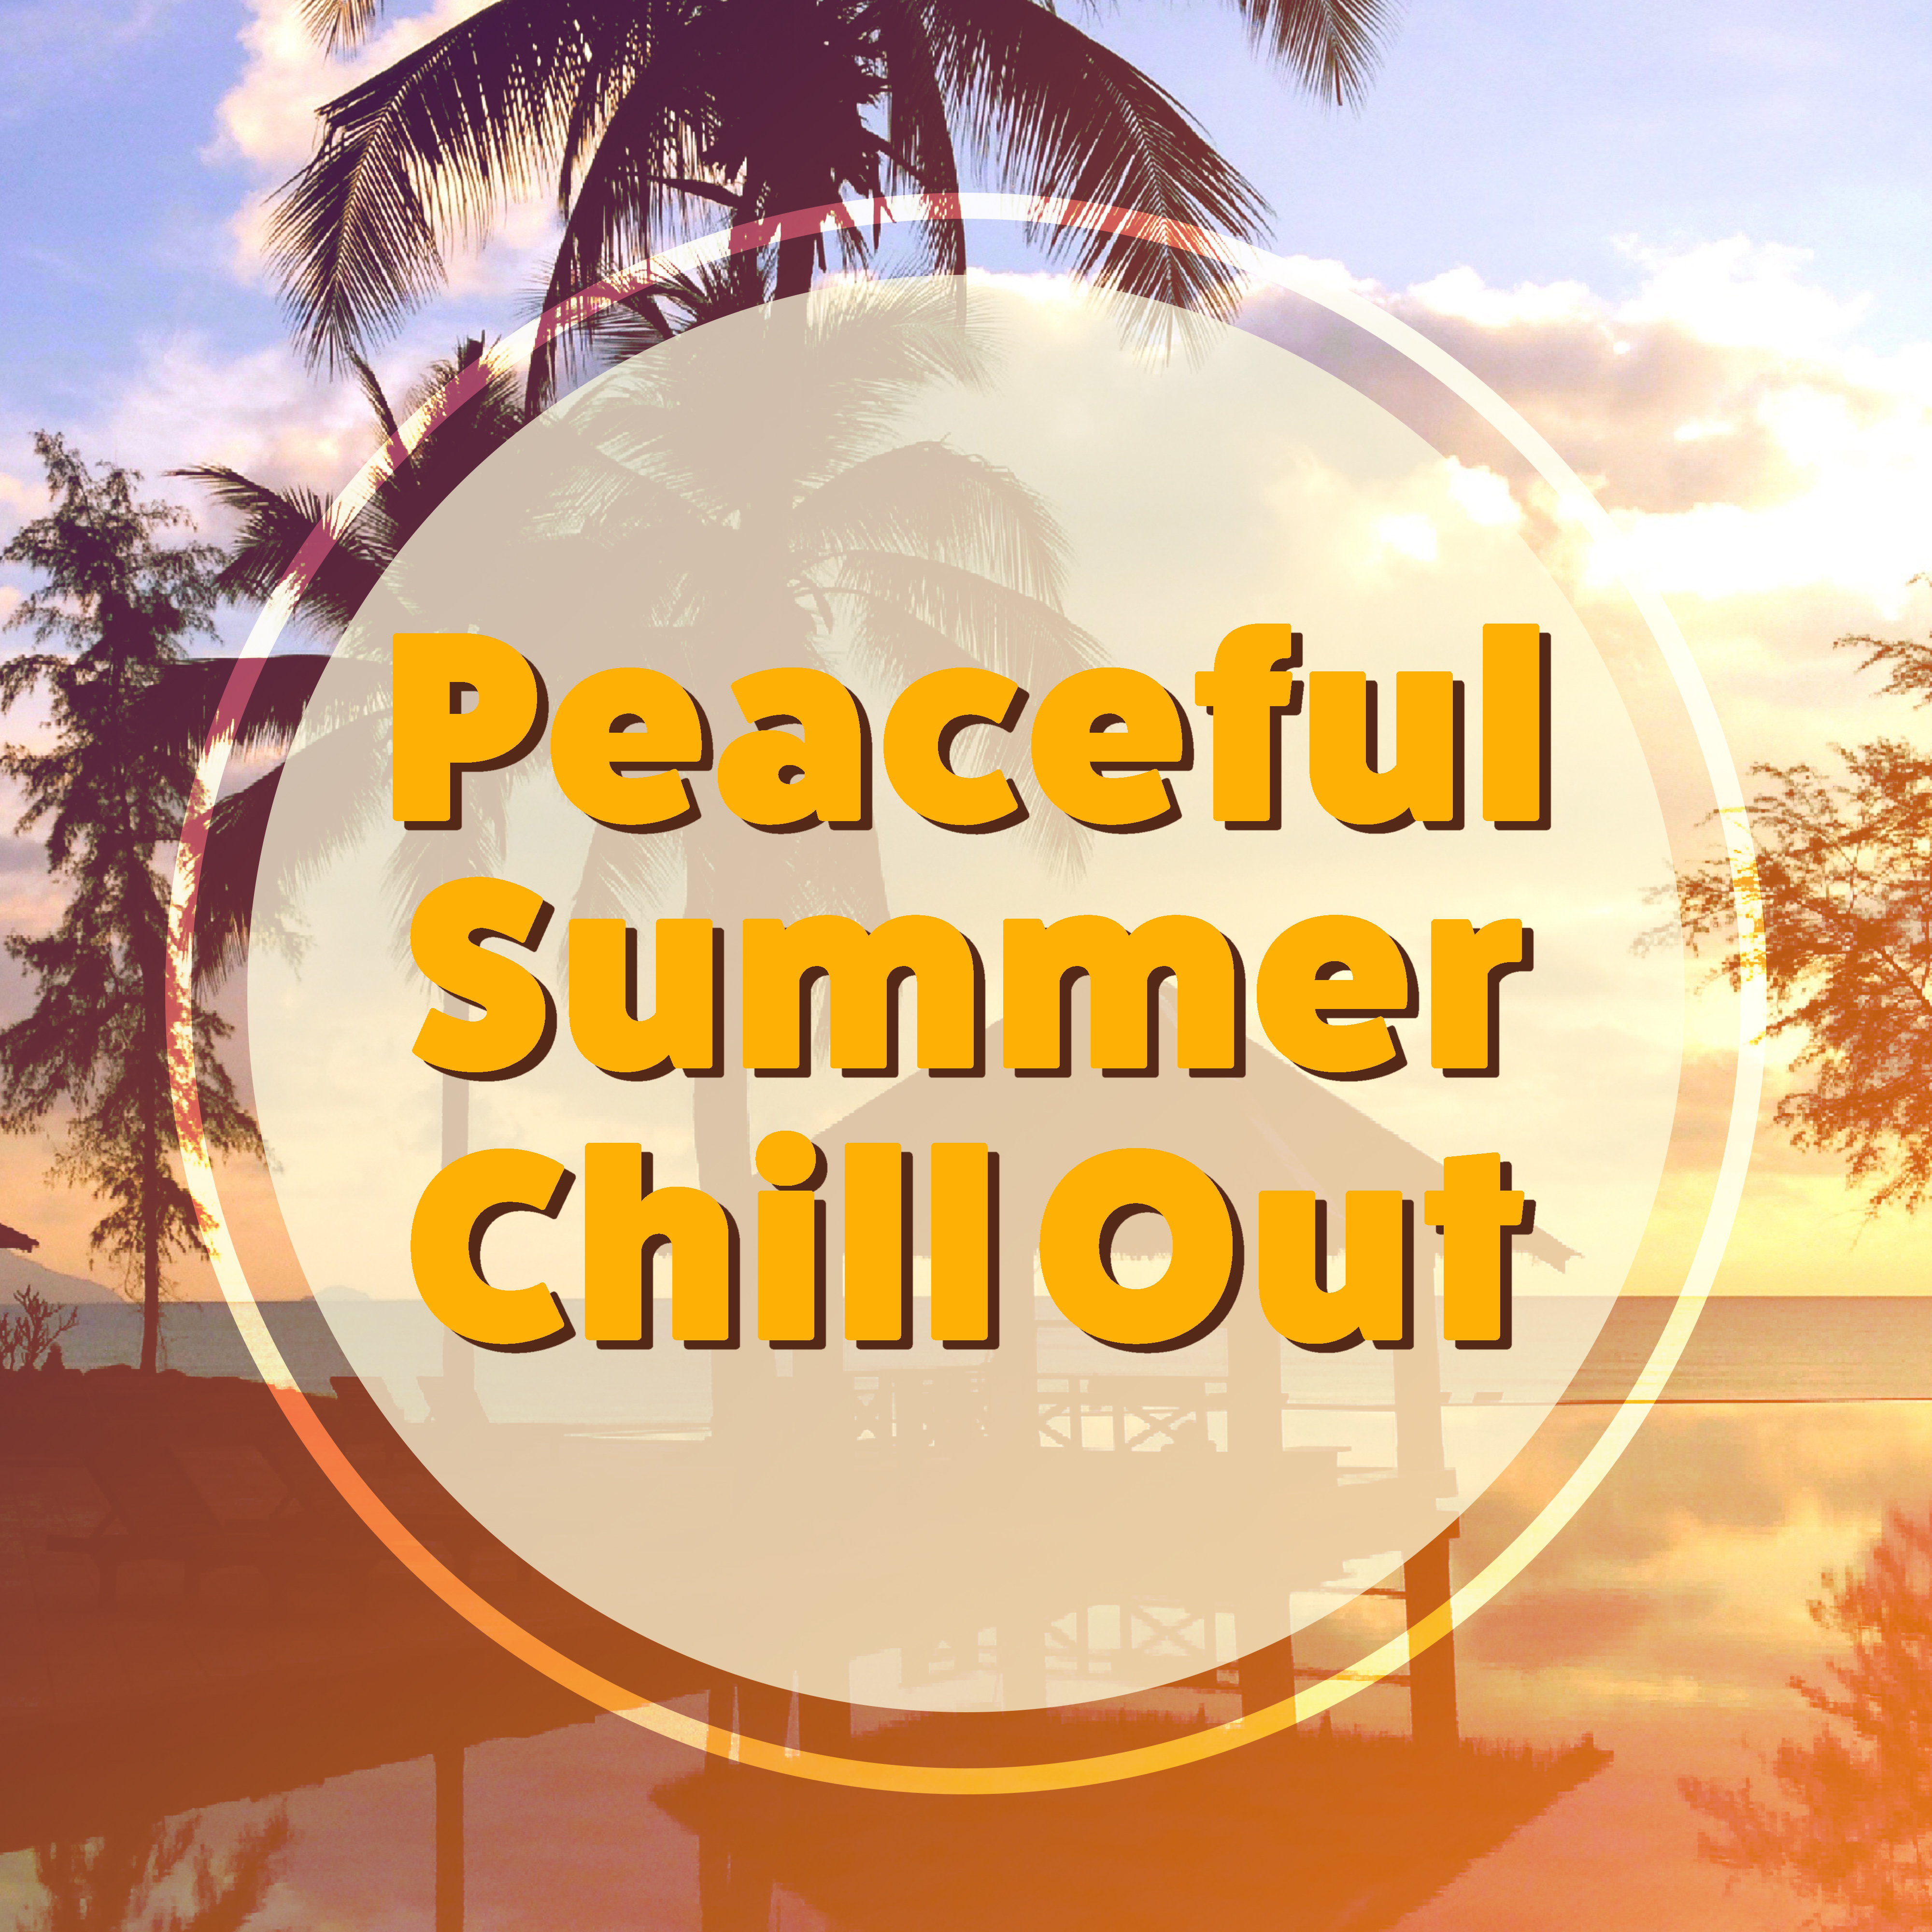 Peaceful Summer Chill Out – Calm Songs for Summer, Chill Out Island, Stress Relief, Ibiza Rest